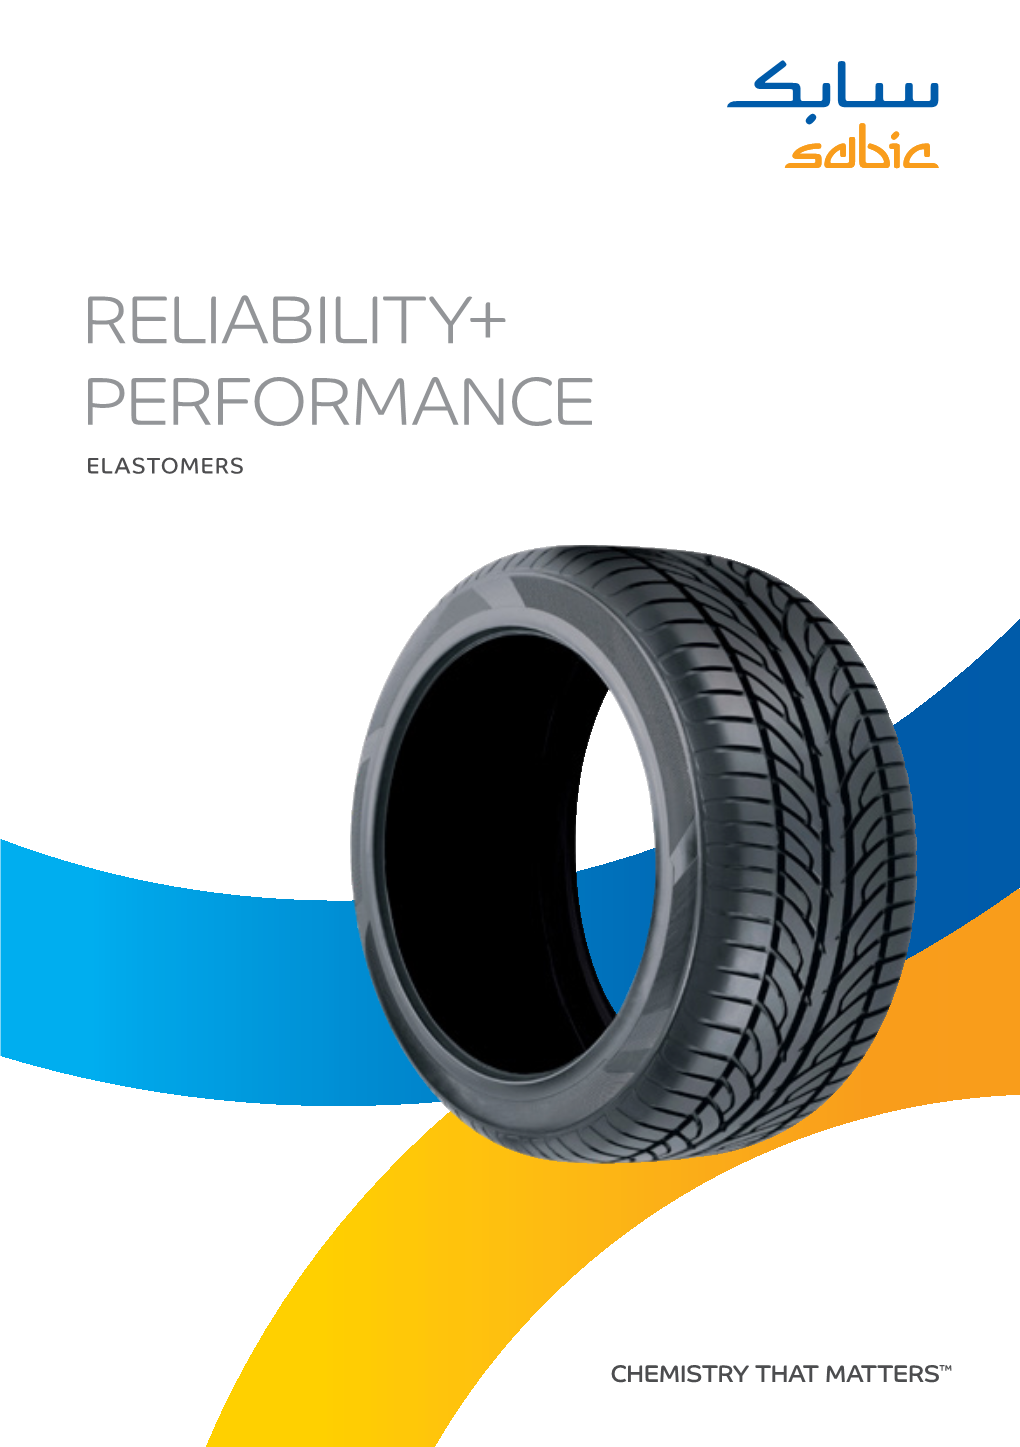 RELIABILITY+ PERFORMANCE ELASTOMERS VISION SABIC Ranks Among the World’S to Be the Preferred World Leader in Chemicals